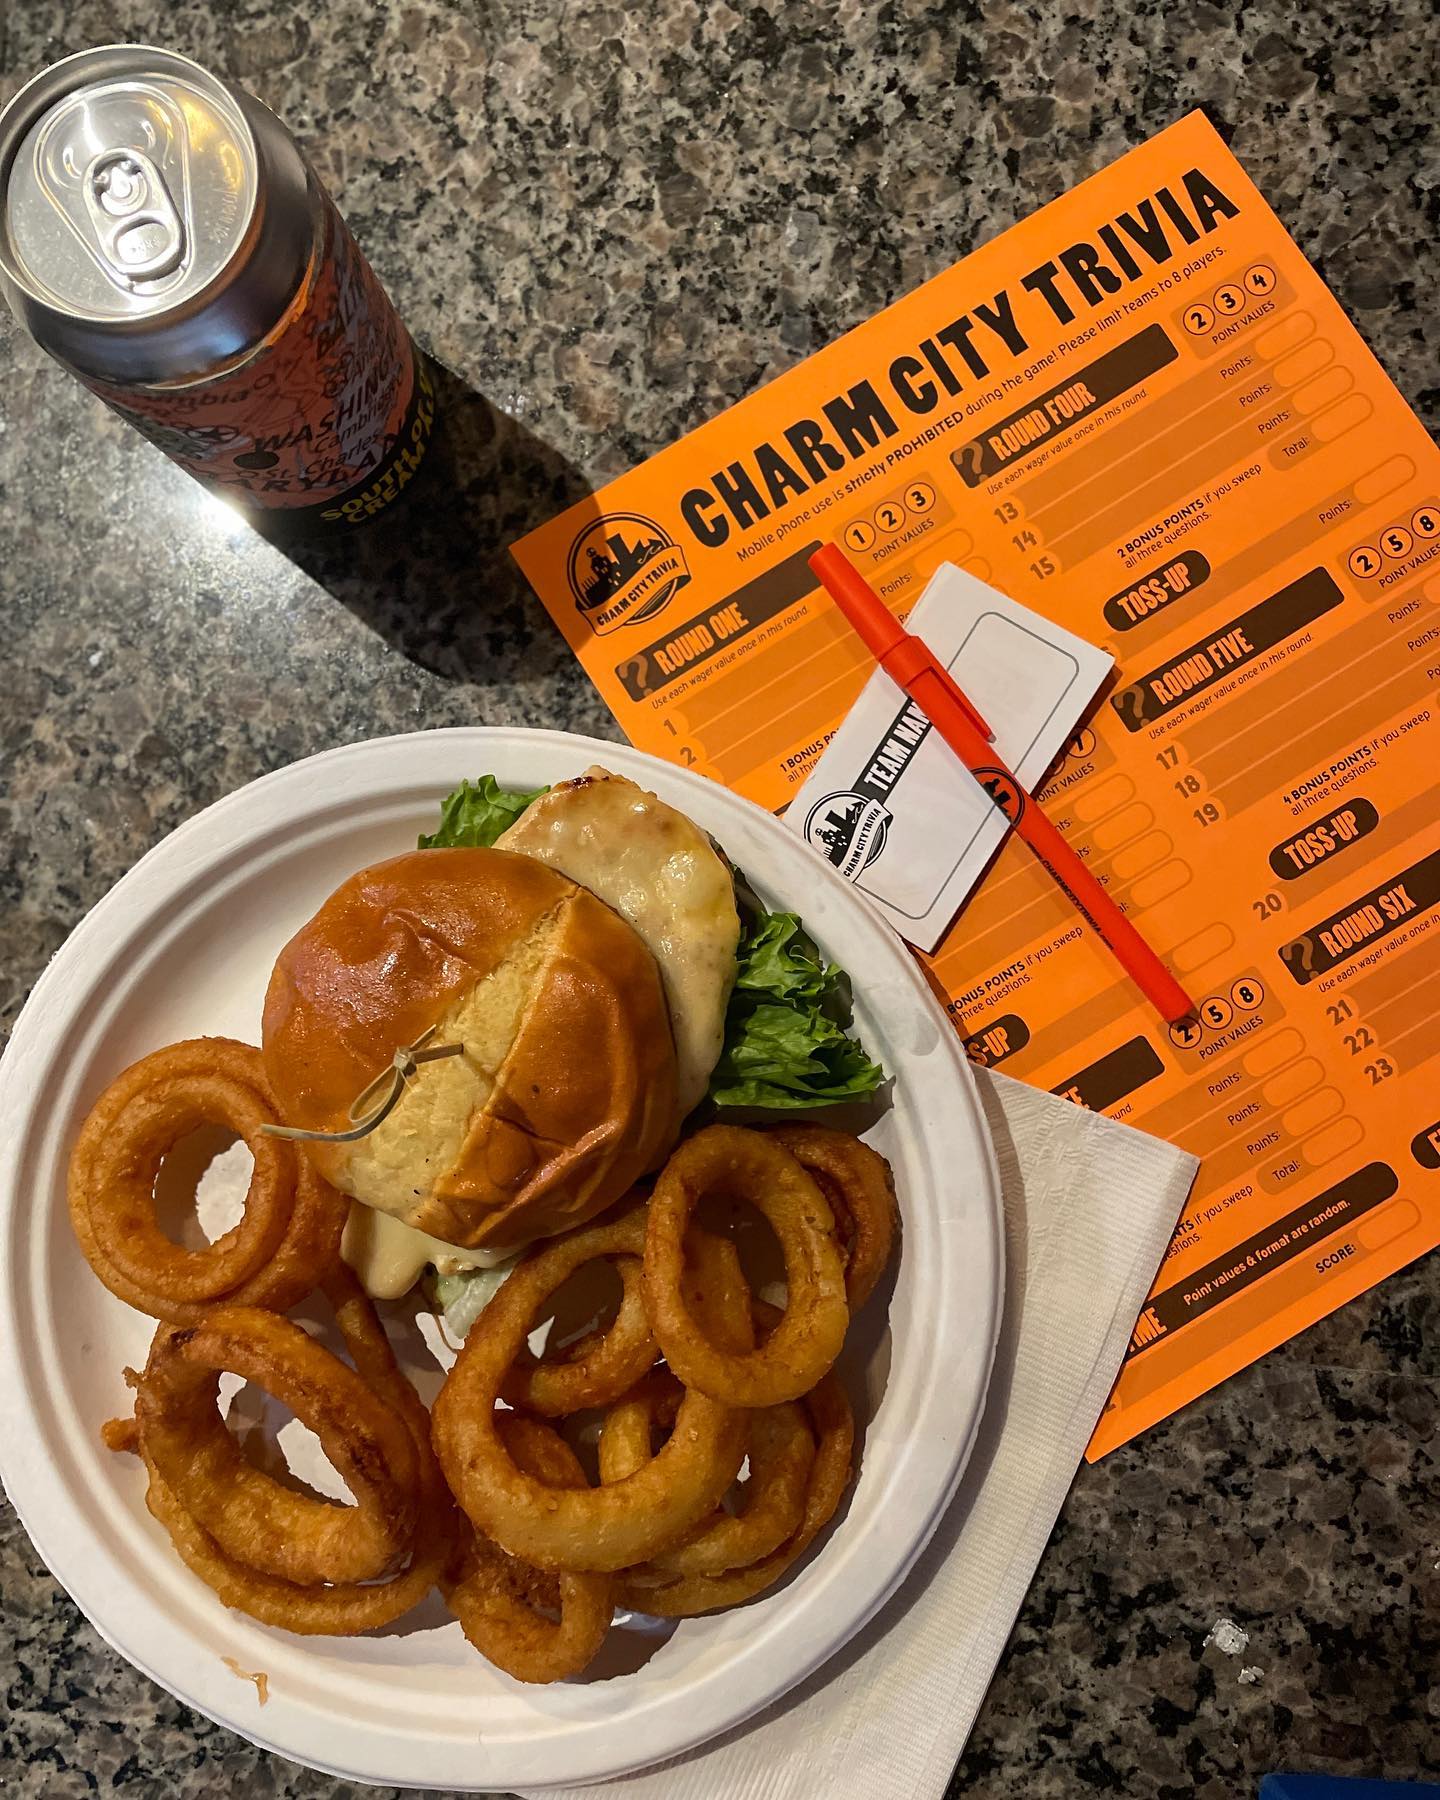 a burger and onion rings on a plate, with a drink and trivia sheet